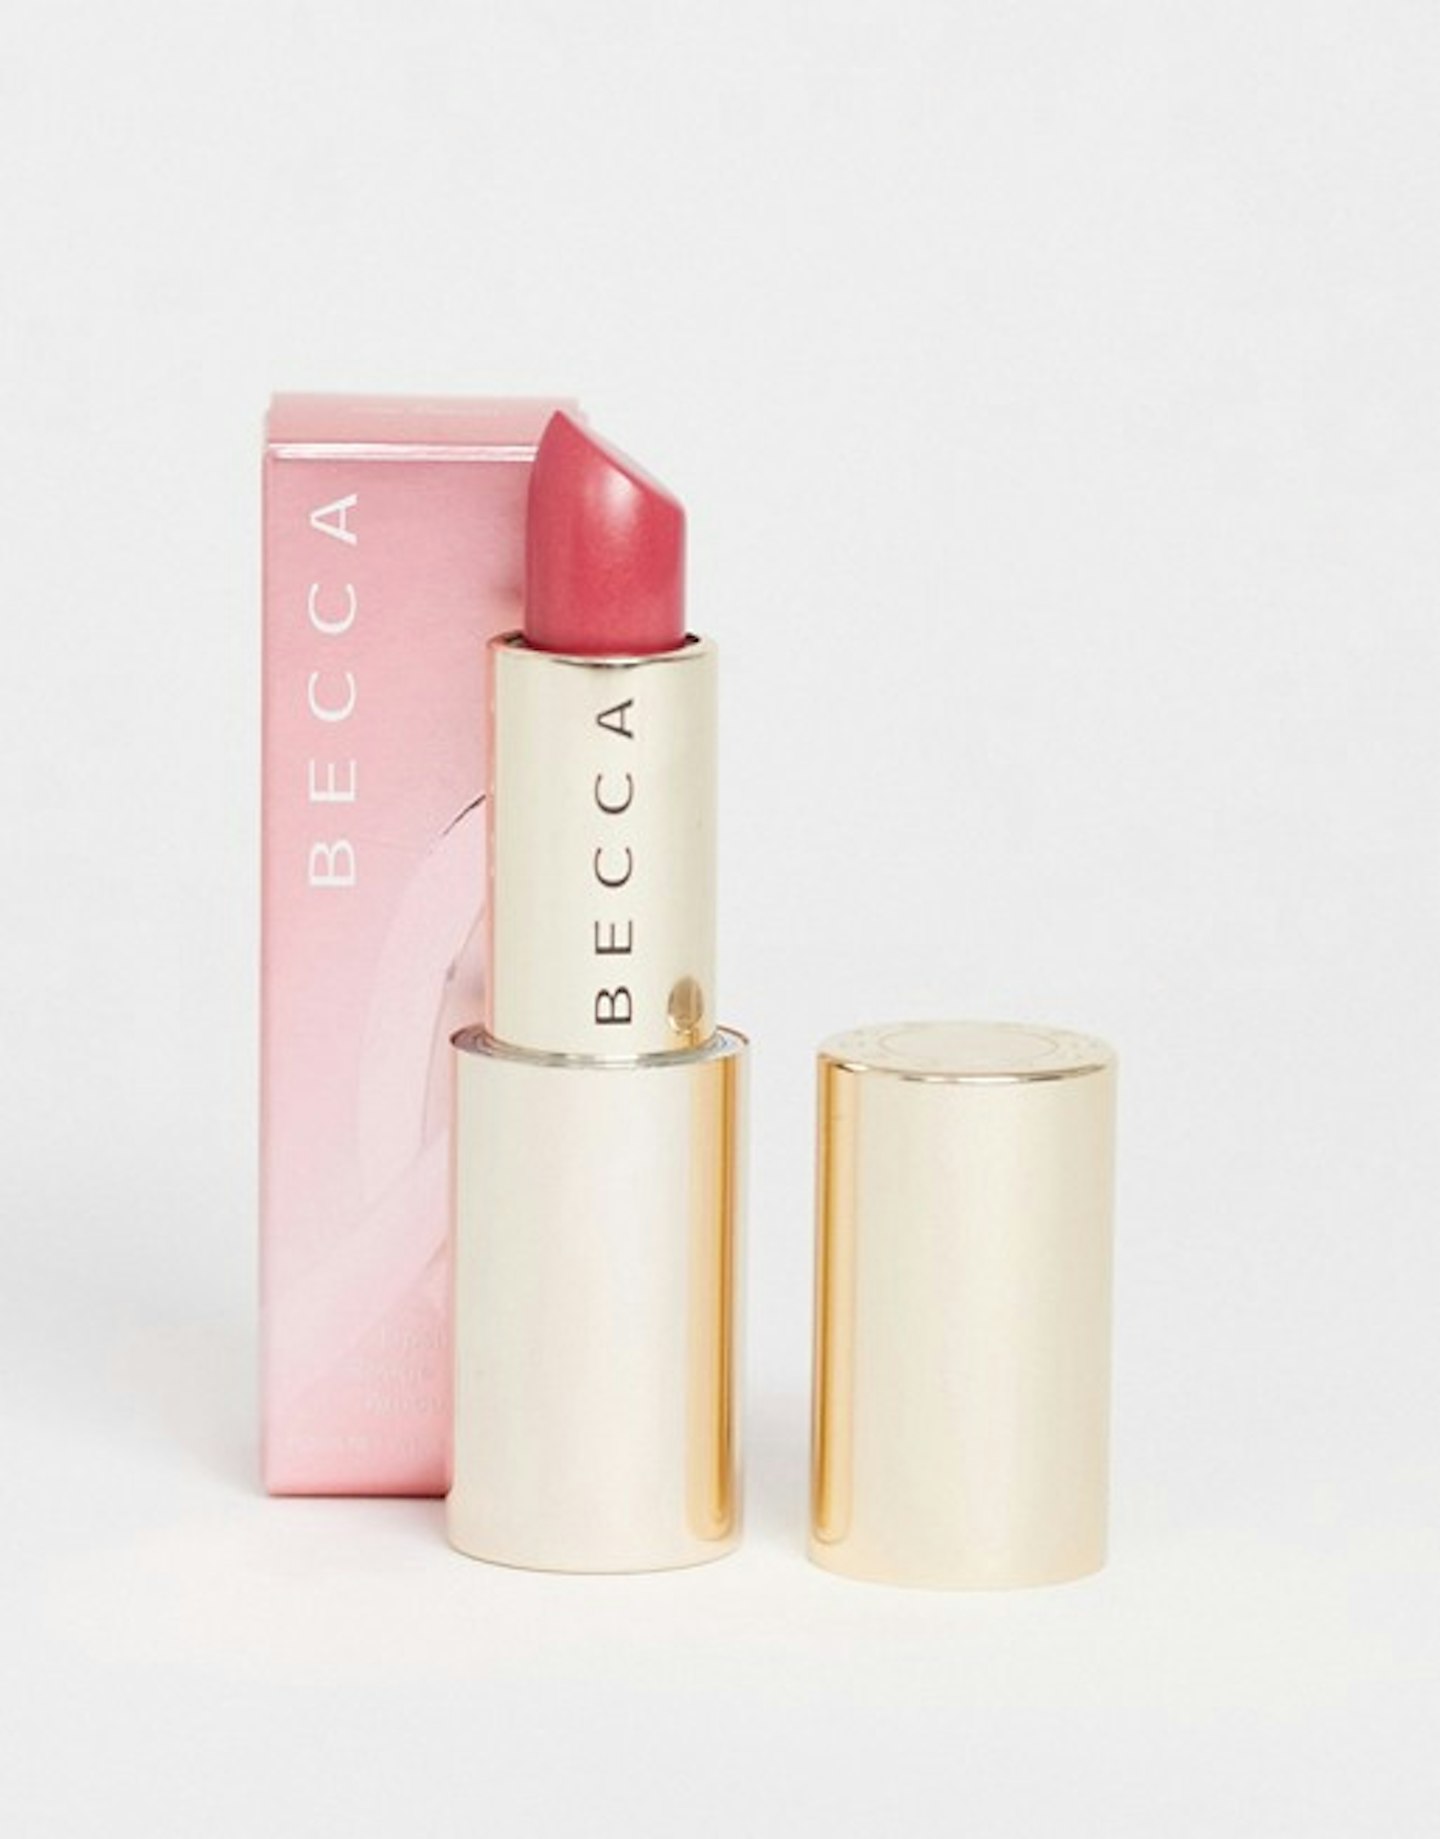 Becca Ultimate Lipstick Love in Pink Ribbon, £20 Packed with hyaluronic acid, snap up this suits-all satin finish lipstick and Becca will donate 20% of the purchase price to the Breast Cancer Research Foundation..